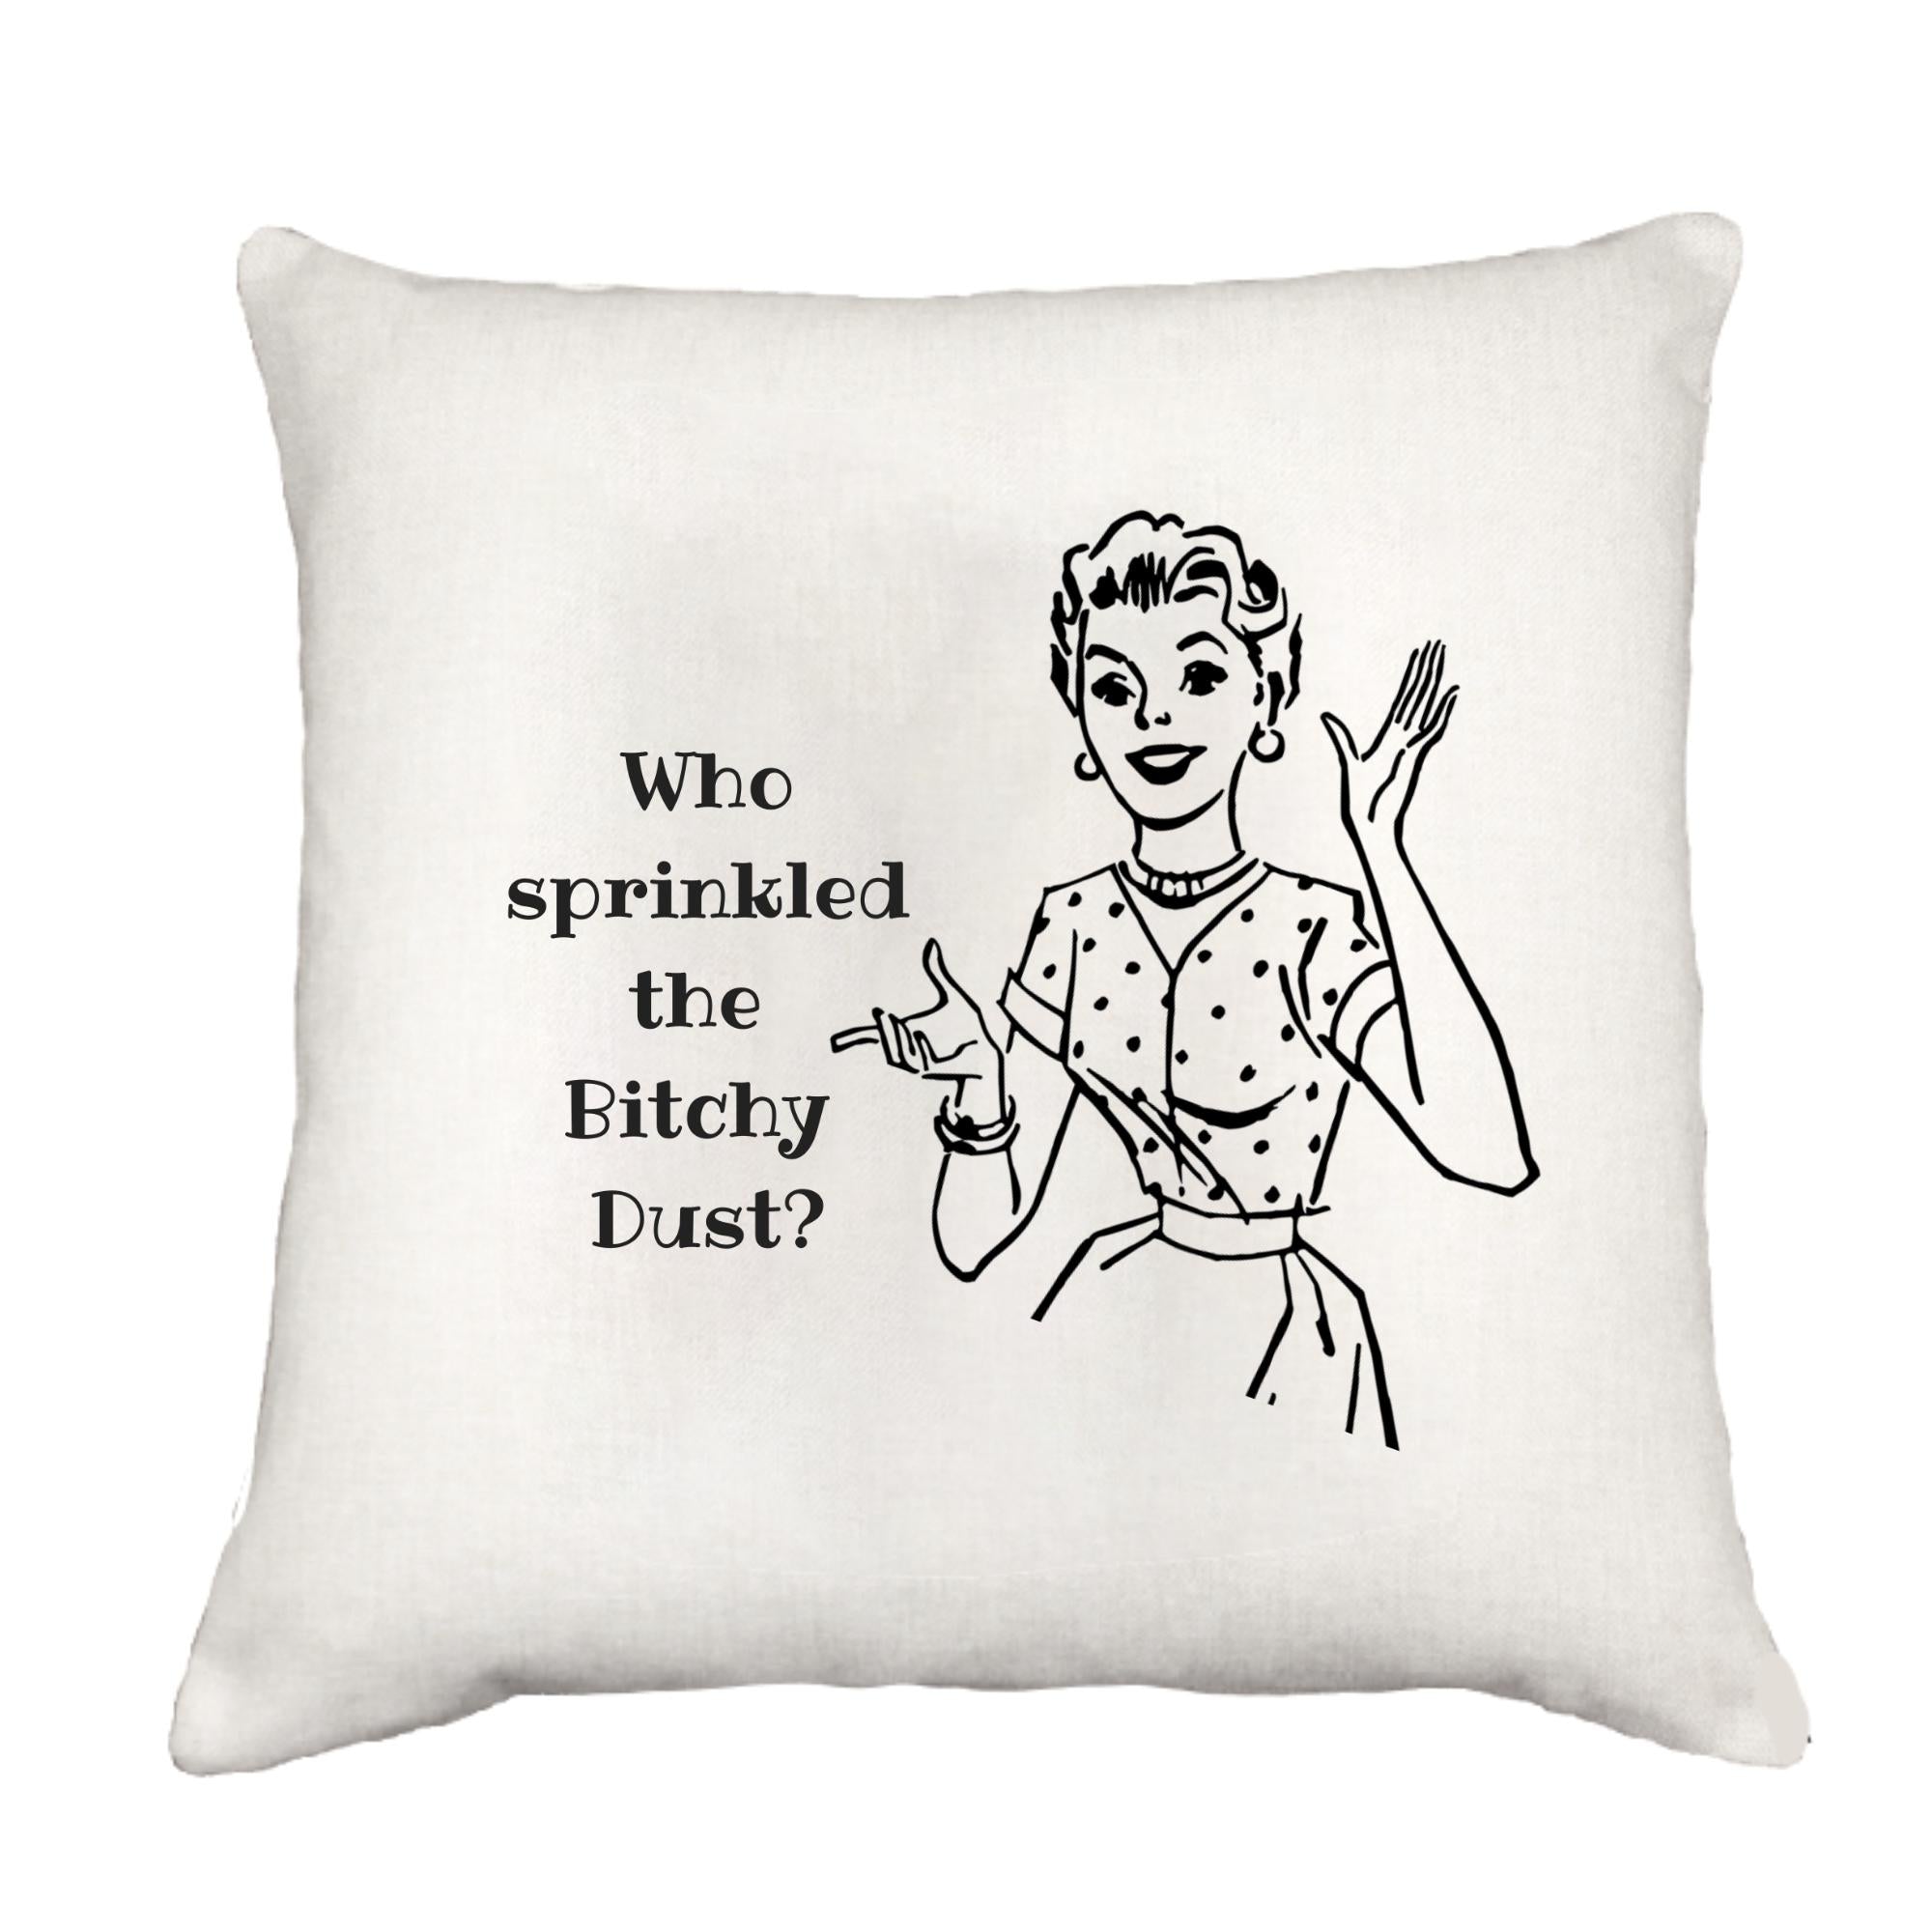 Bitchy Dust Cottage Pillow Throw/Decorative Pillow - Southern Sisters